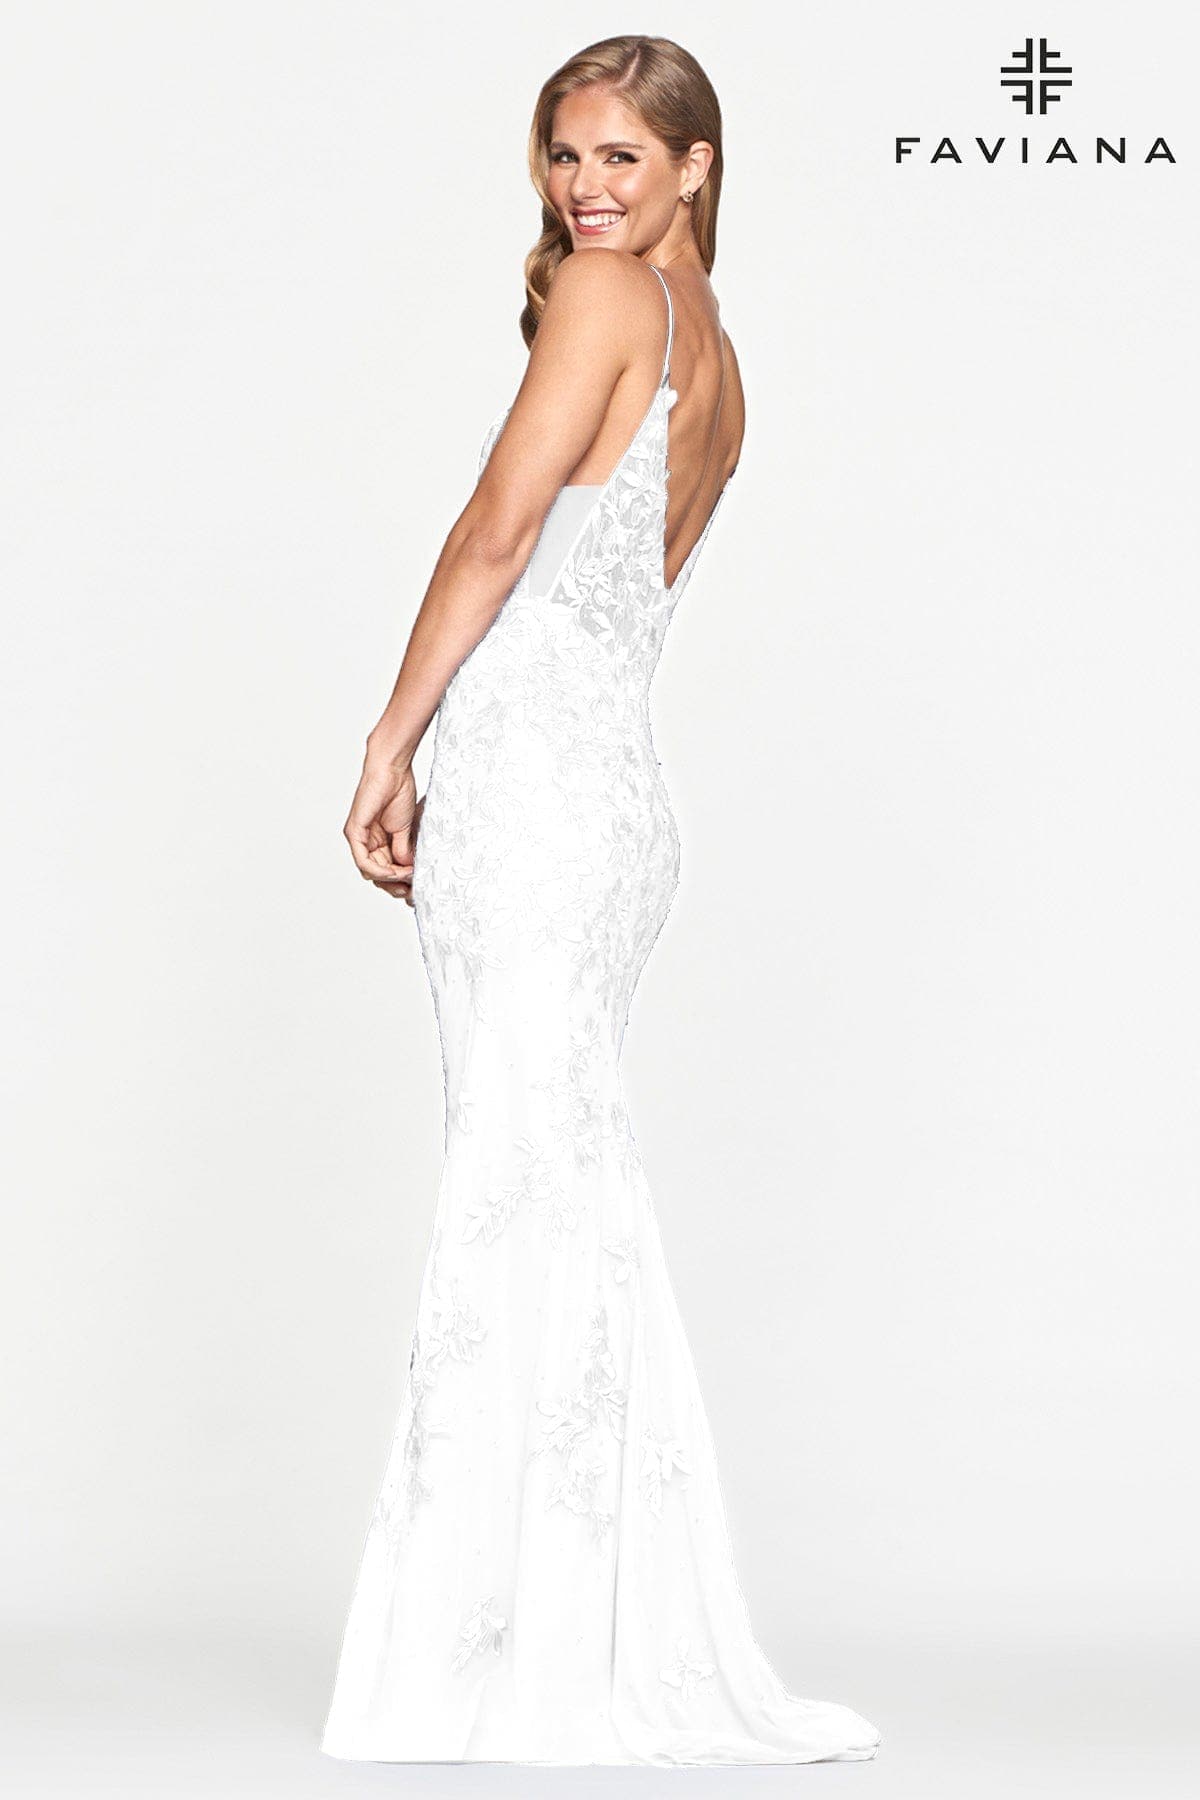 White Lace Prom Dress With Deep V Neckline | S10509